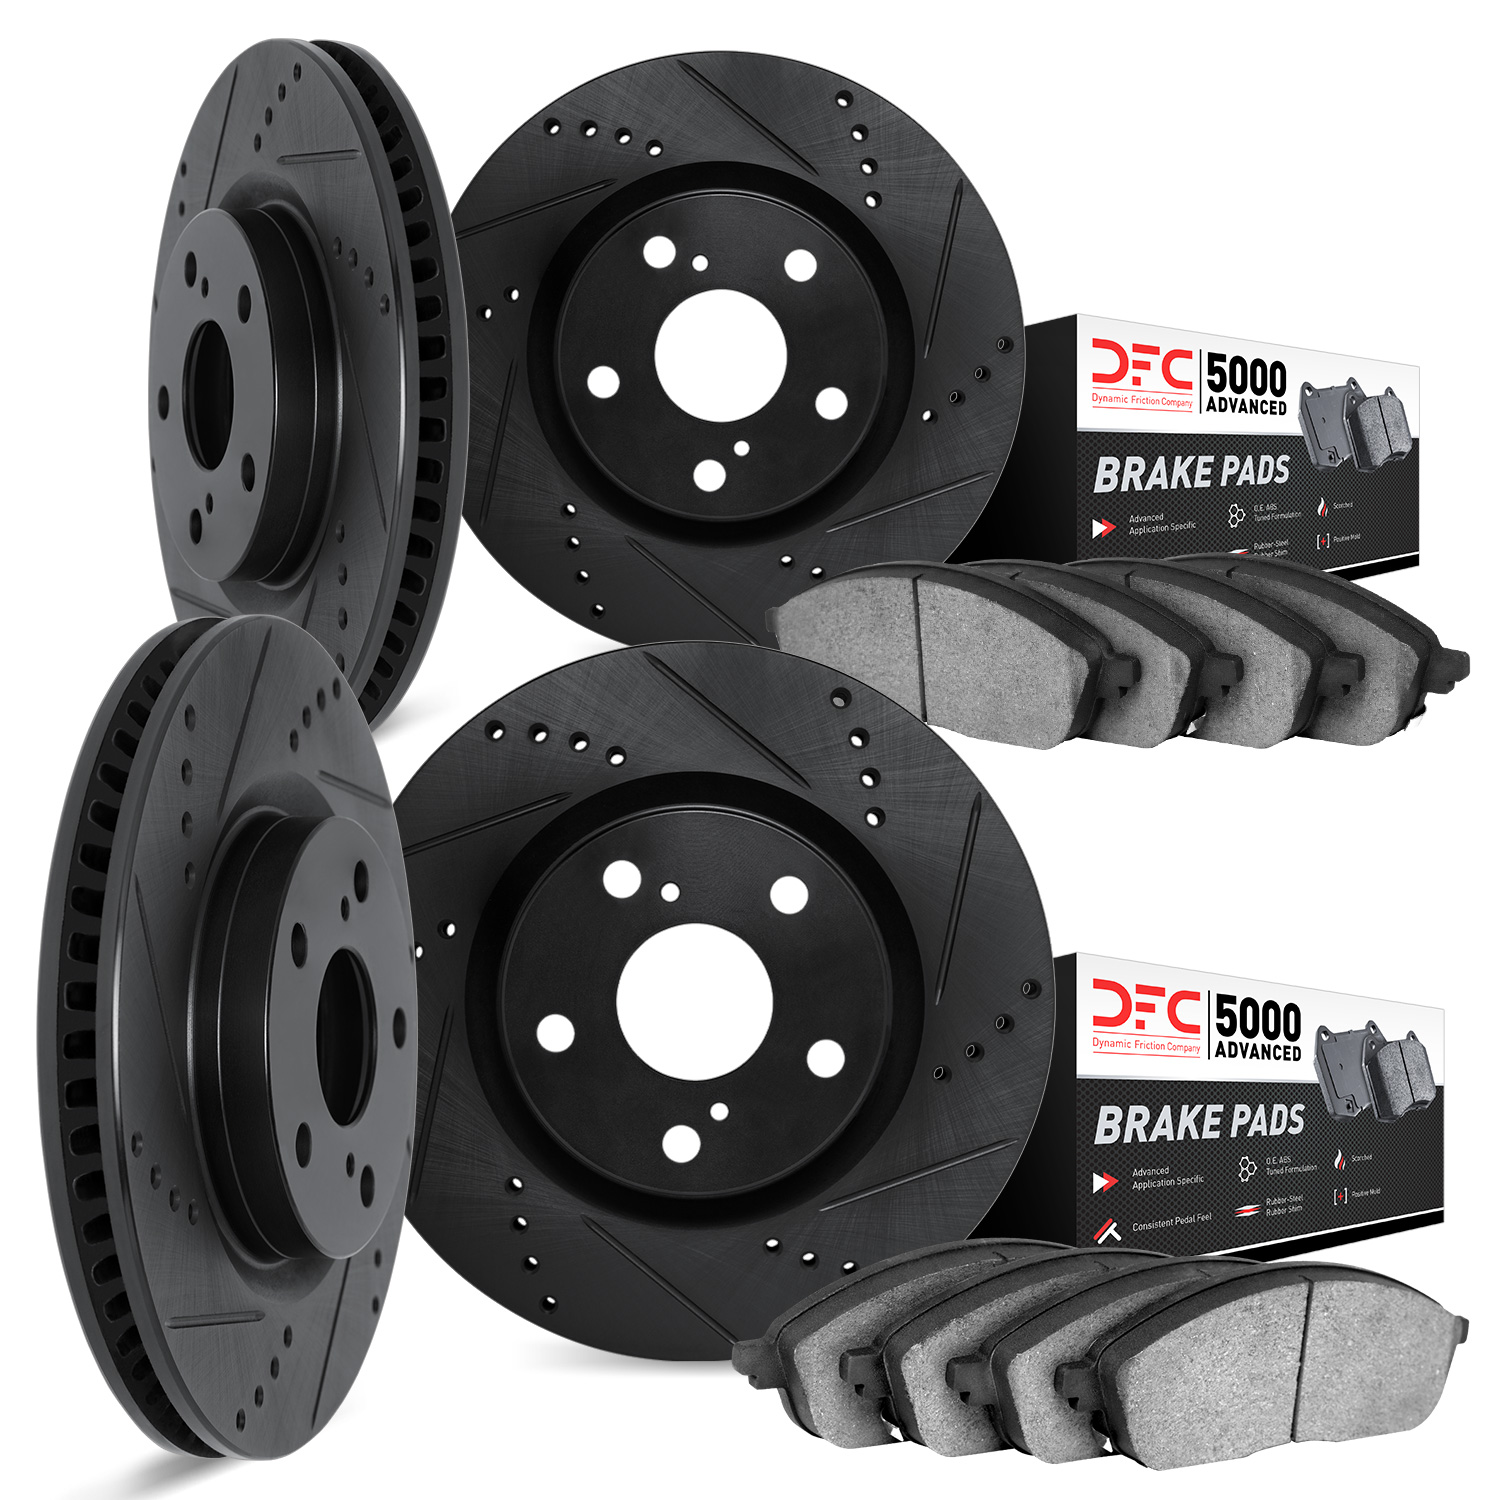 8504-31034 Drilled/Slotted Brake Rotors w/5000 Advanced Brake Pads Kit [Black], 2013-2020 BMW, Position: Front and Rear